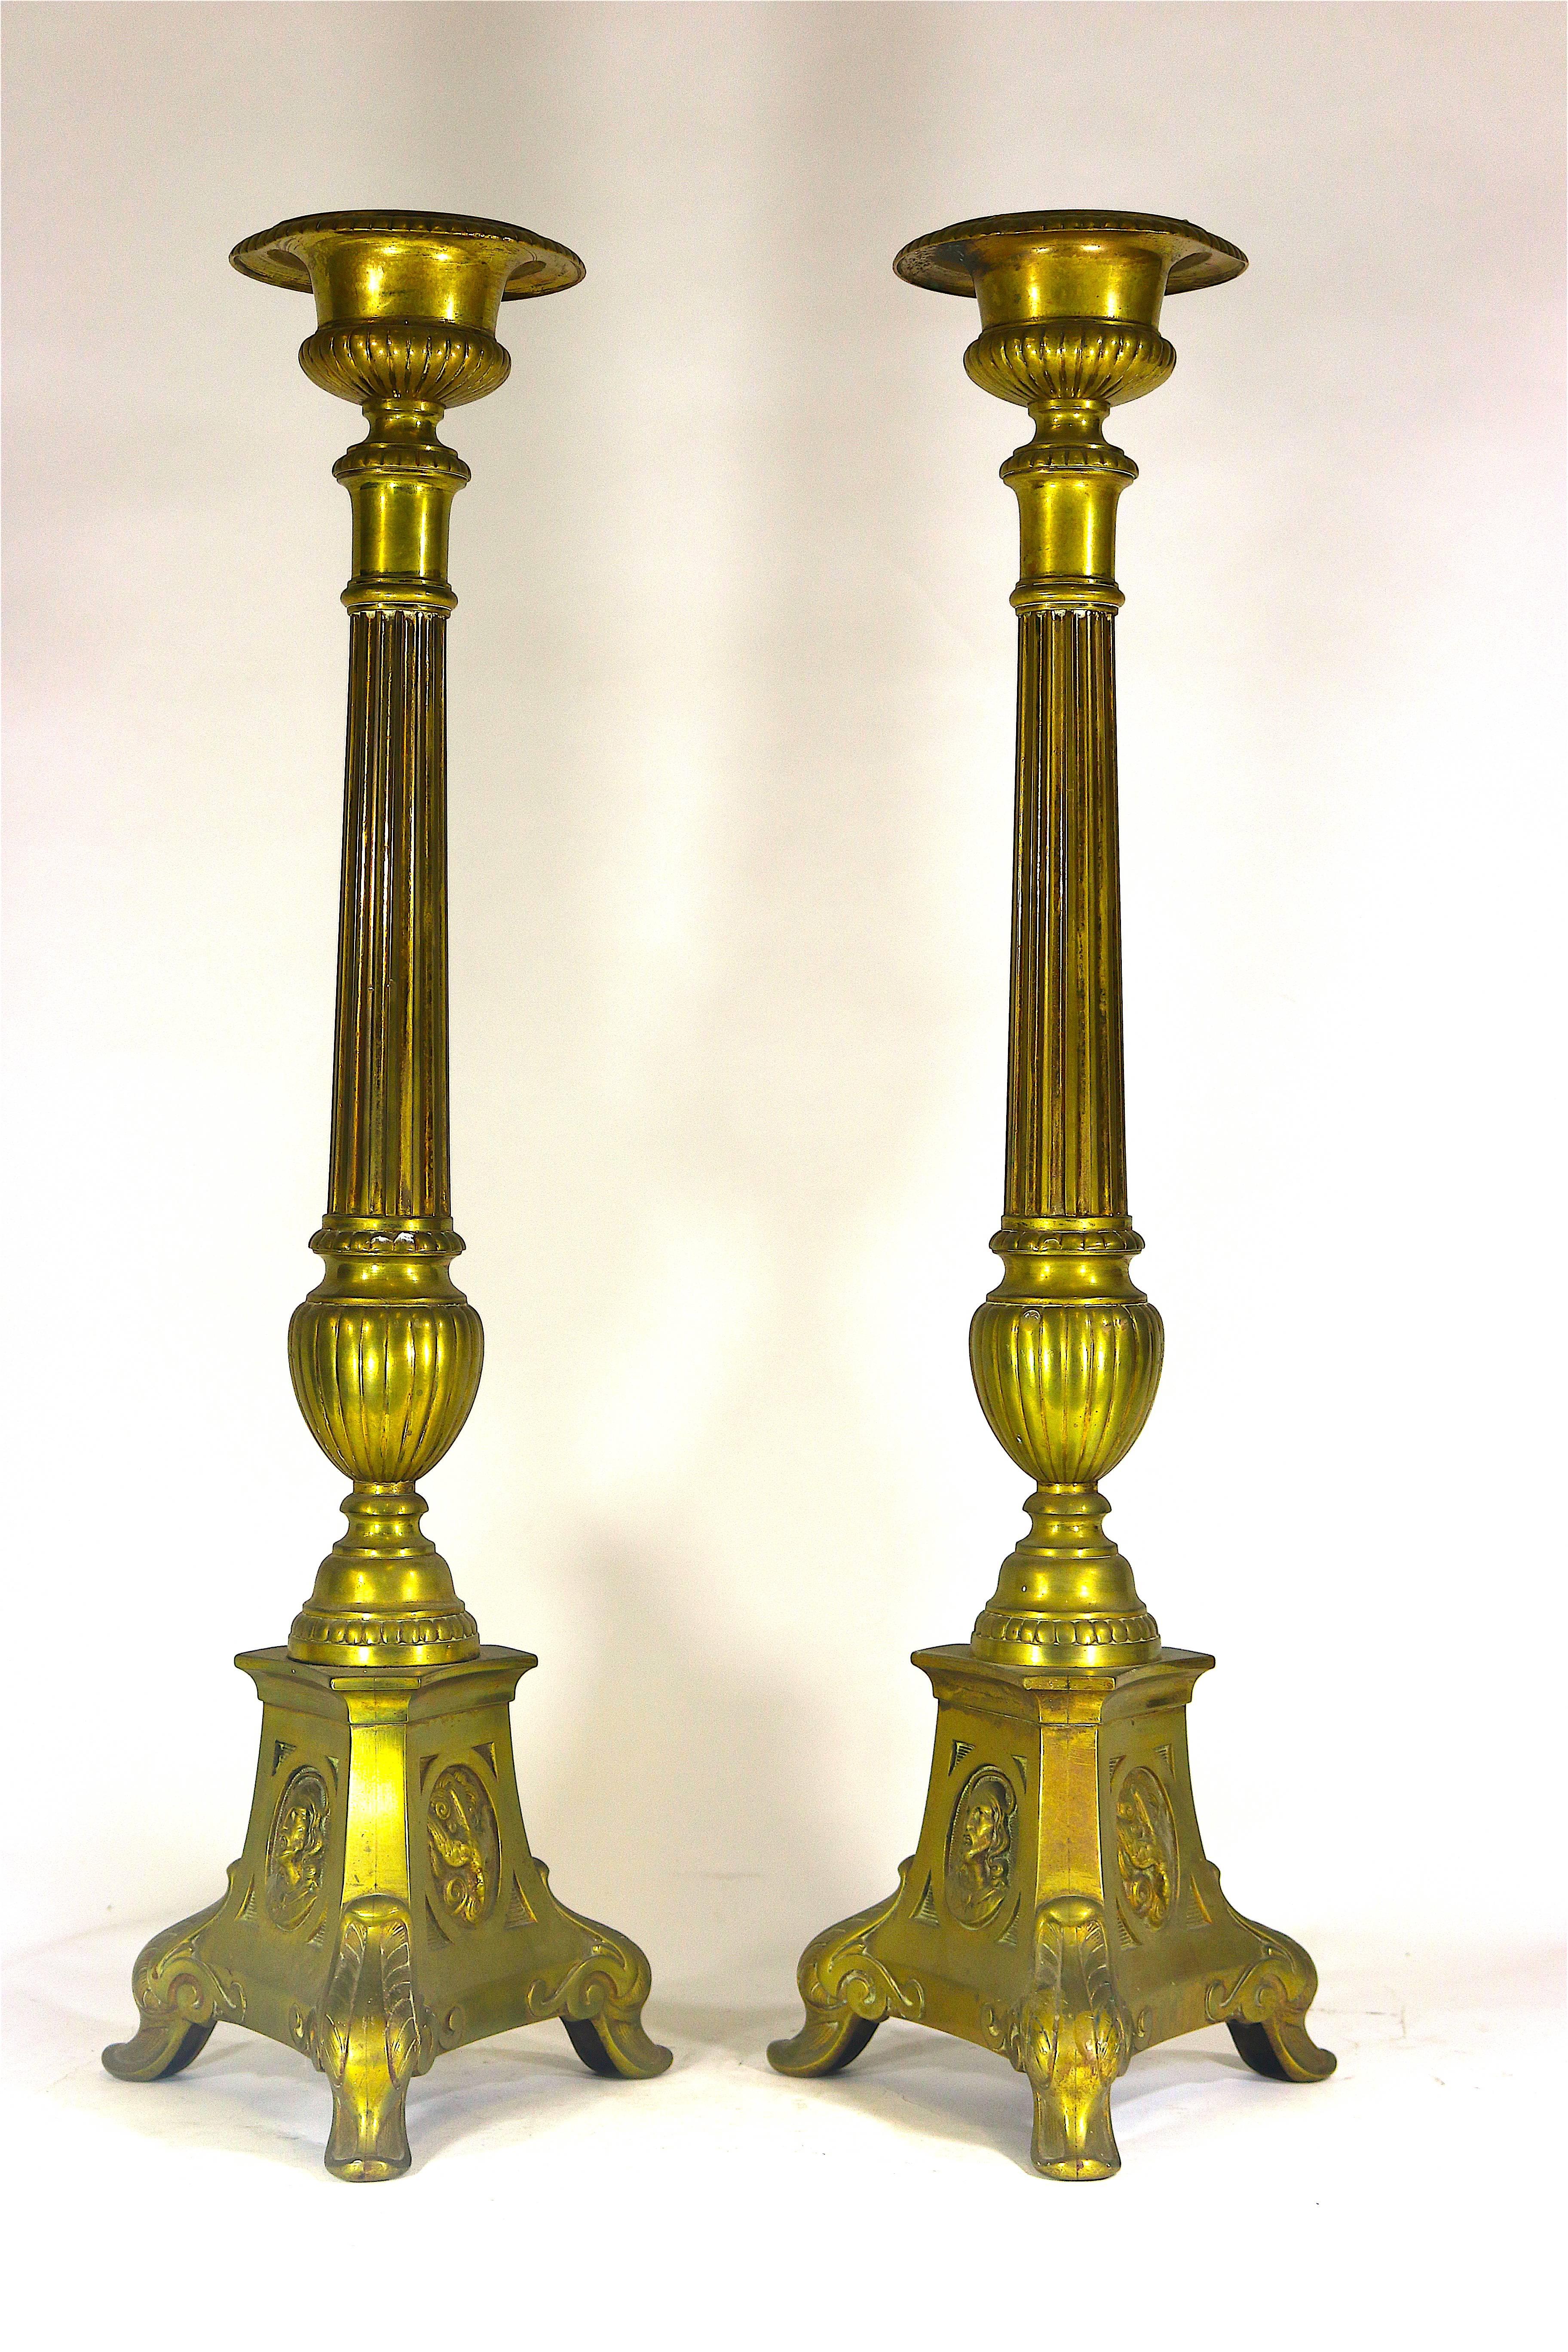 1800s Monumental Brass Pricket Candlesticks, Renaissance Revival-Harkness Estate In Good Condition For Sale In West Palm Beach, FL